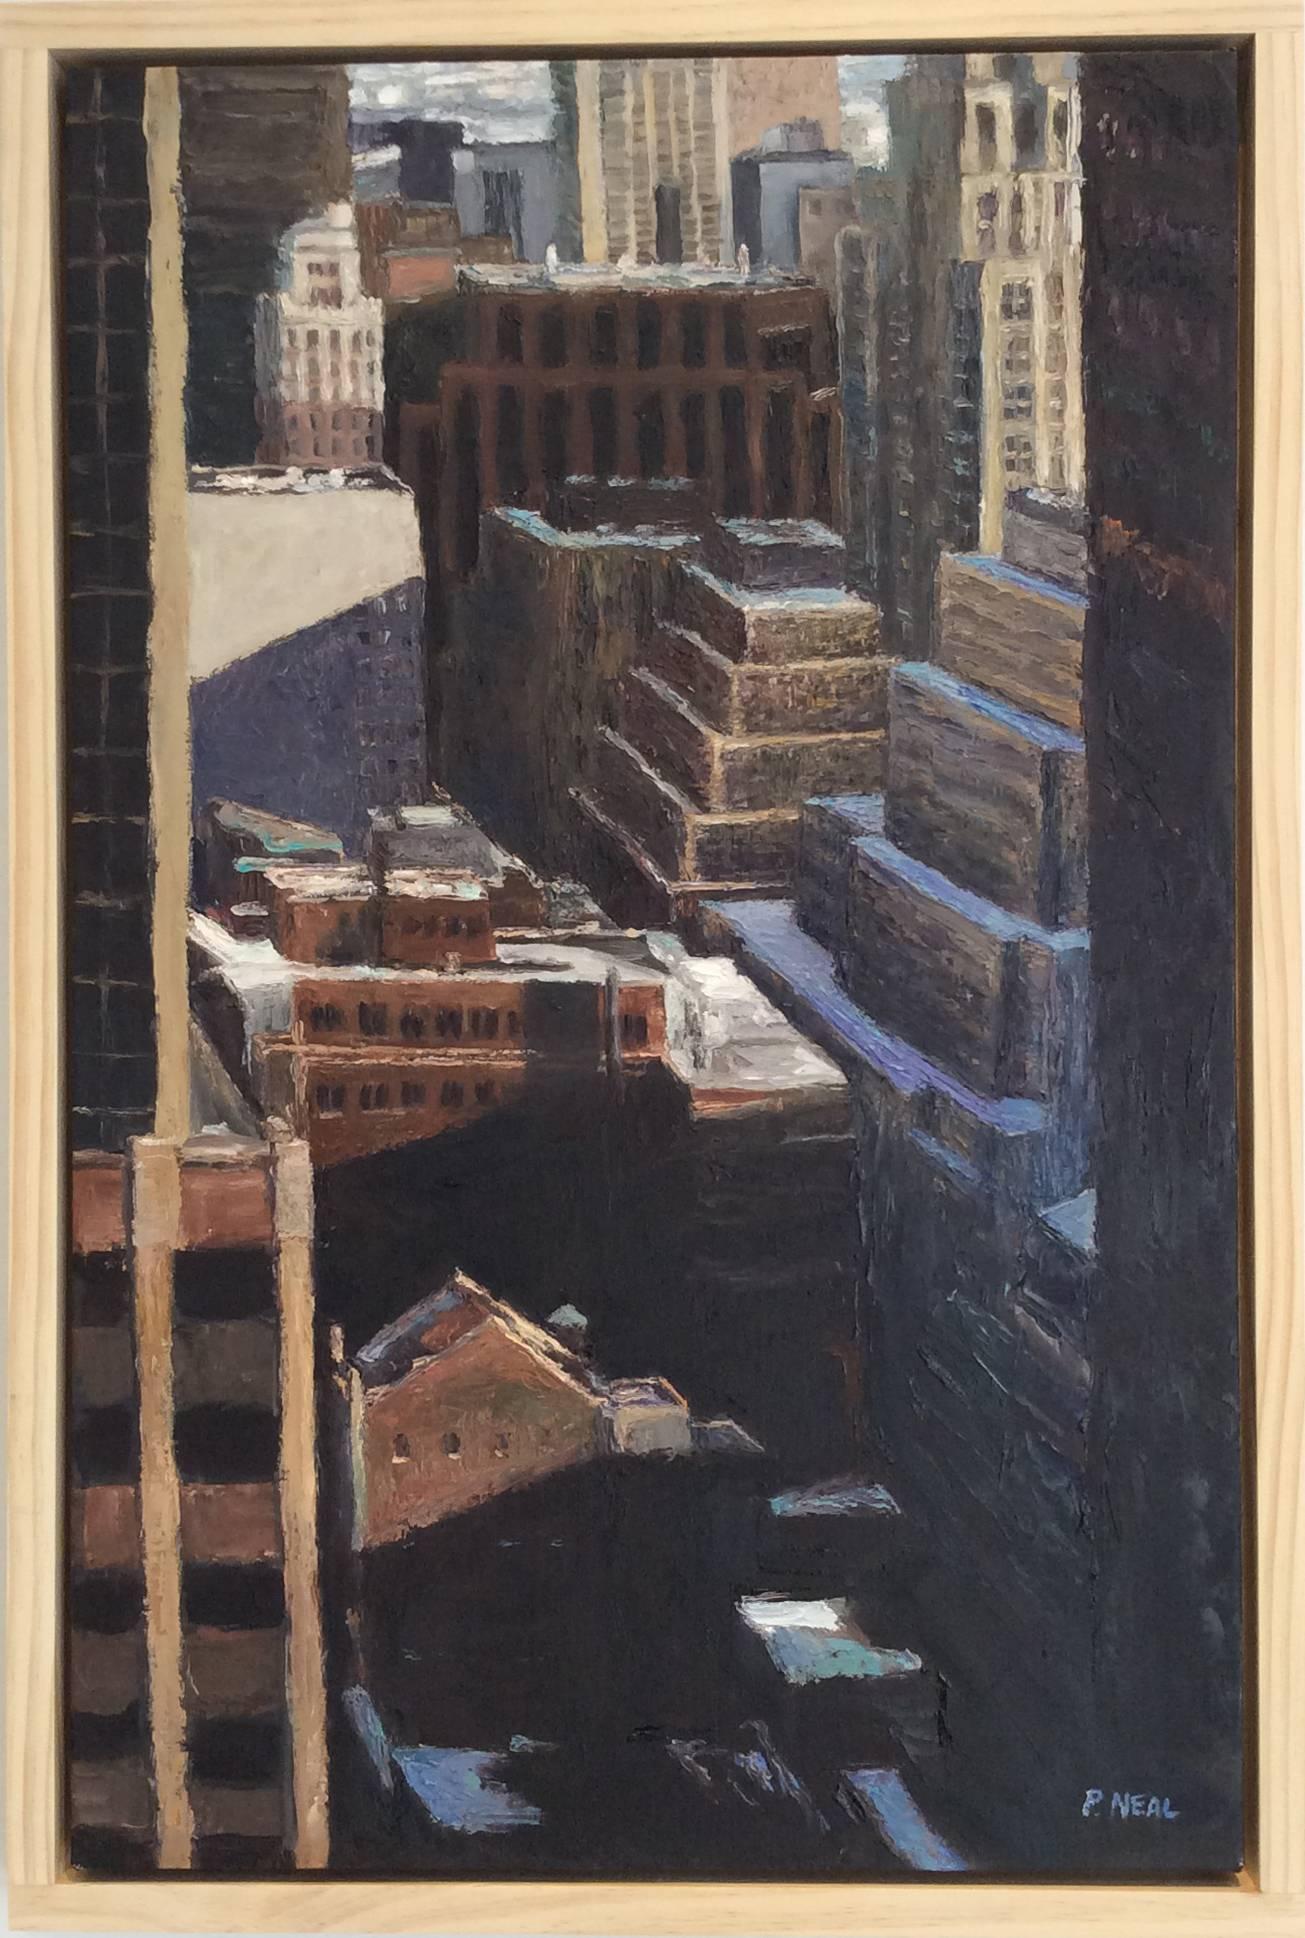 Contemporay cityscape painting of Manhattan from an aerial view 
Oil on canvas in light wood frame
28 x 18 inches, 30 x 20 inches framed

This contemporary oil painting depicting an aerial metropolitan view is the work of realist painter Patty Neal.